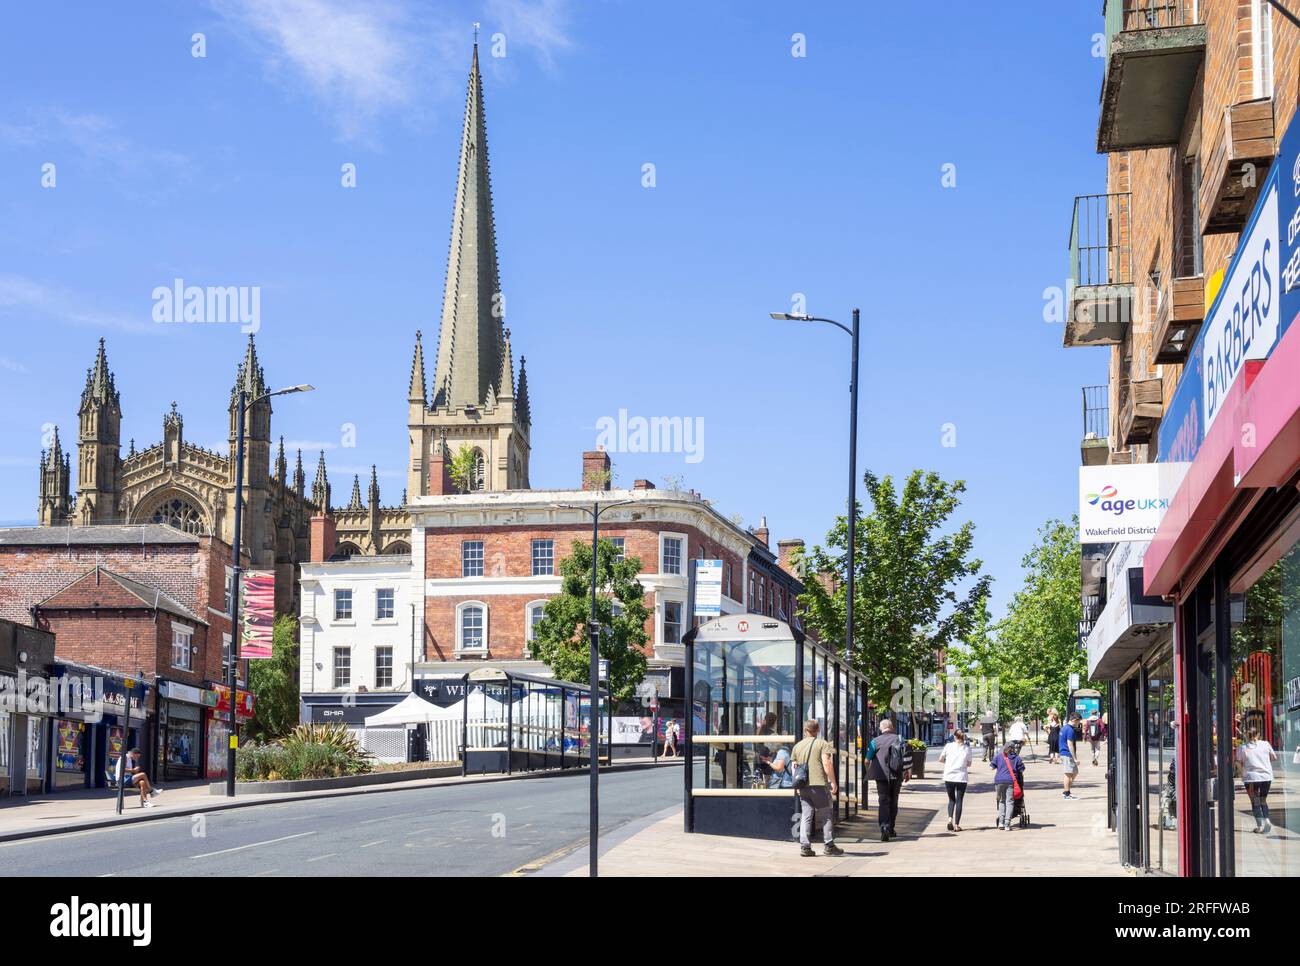 Wakefield The Springs shopping street Wakefield city centre Wakefield West Yorkshire England UK GB Europe Stock Photo